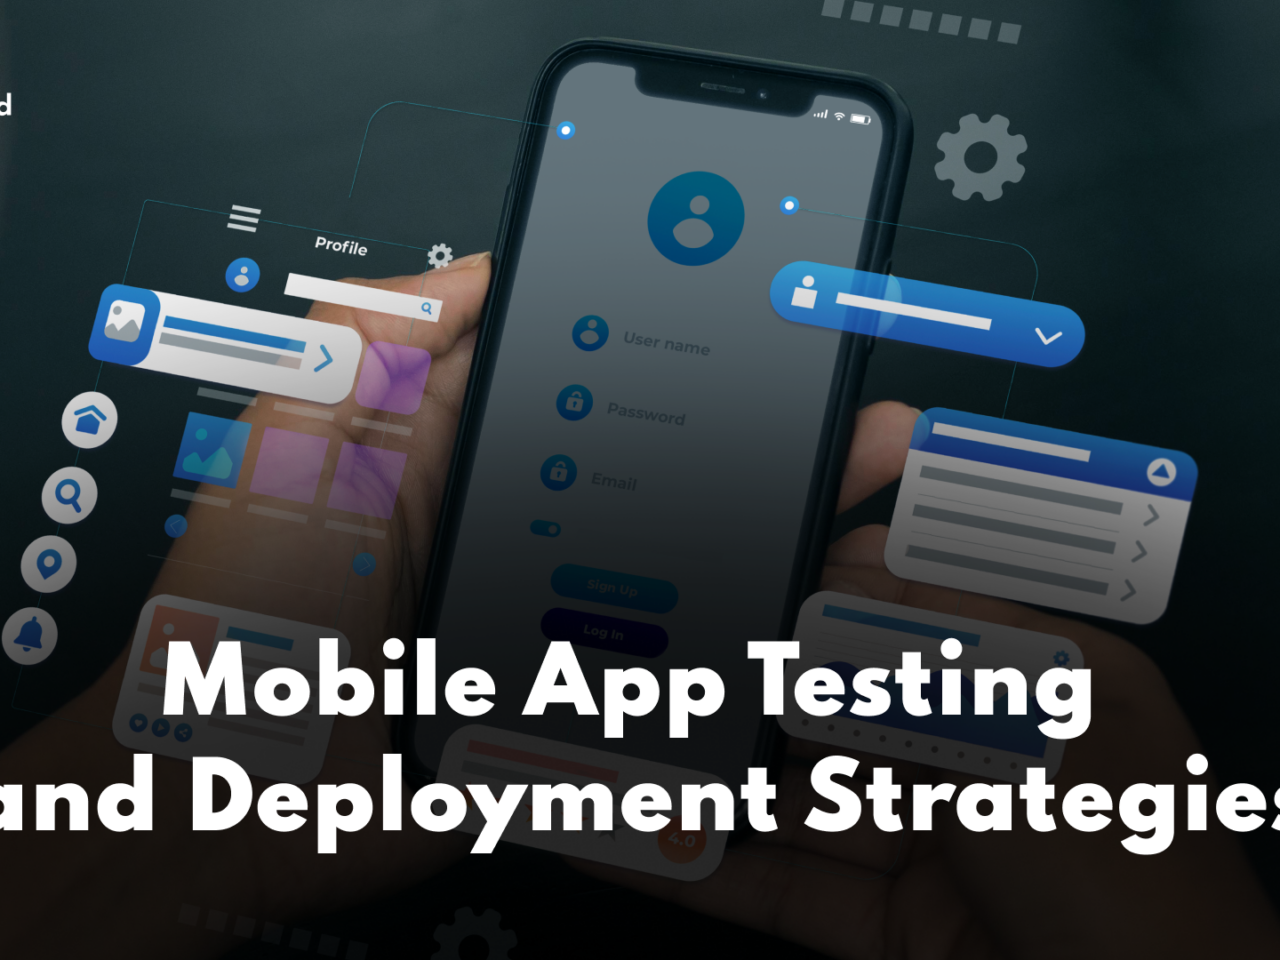 Mobile App Testing and Deployment Strategies : An Informative Guide